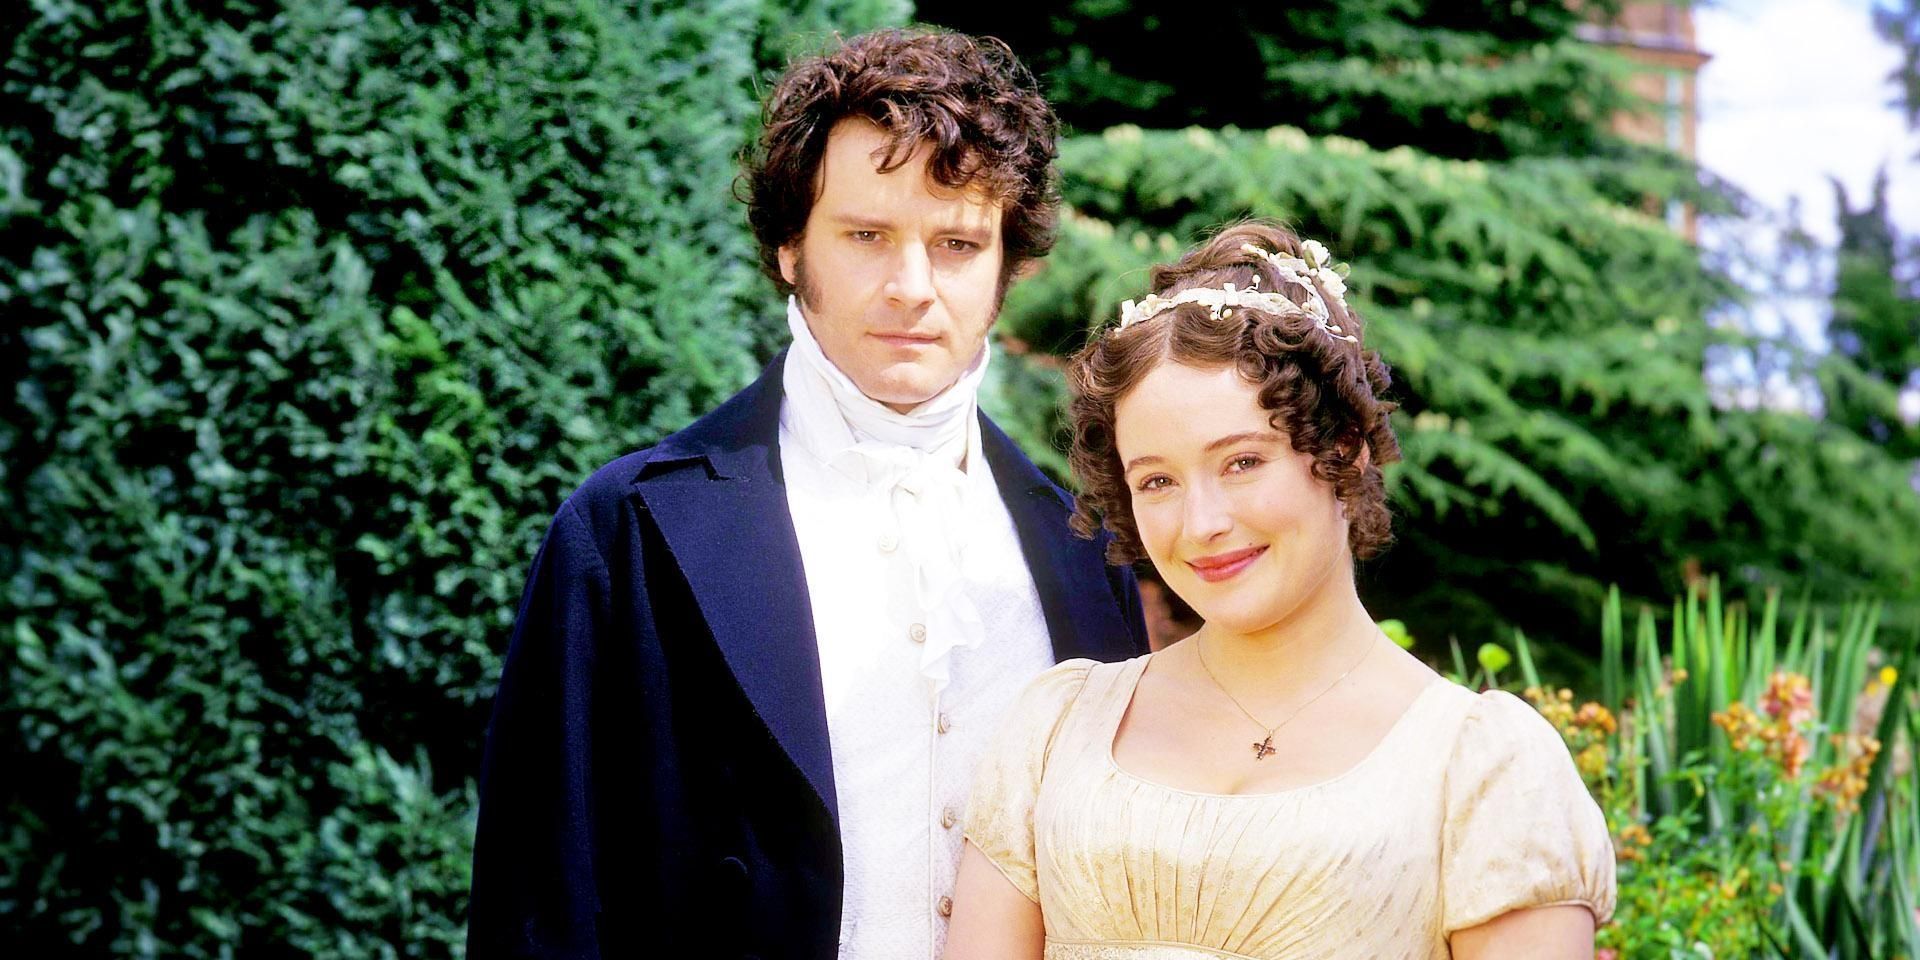 Elizabeth and Darcy pose next to each other in BBC's Pride and Prejudice 